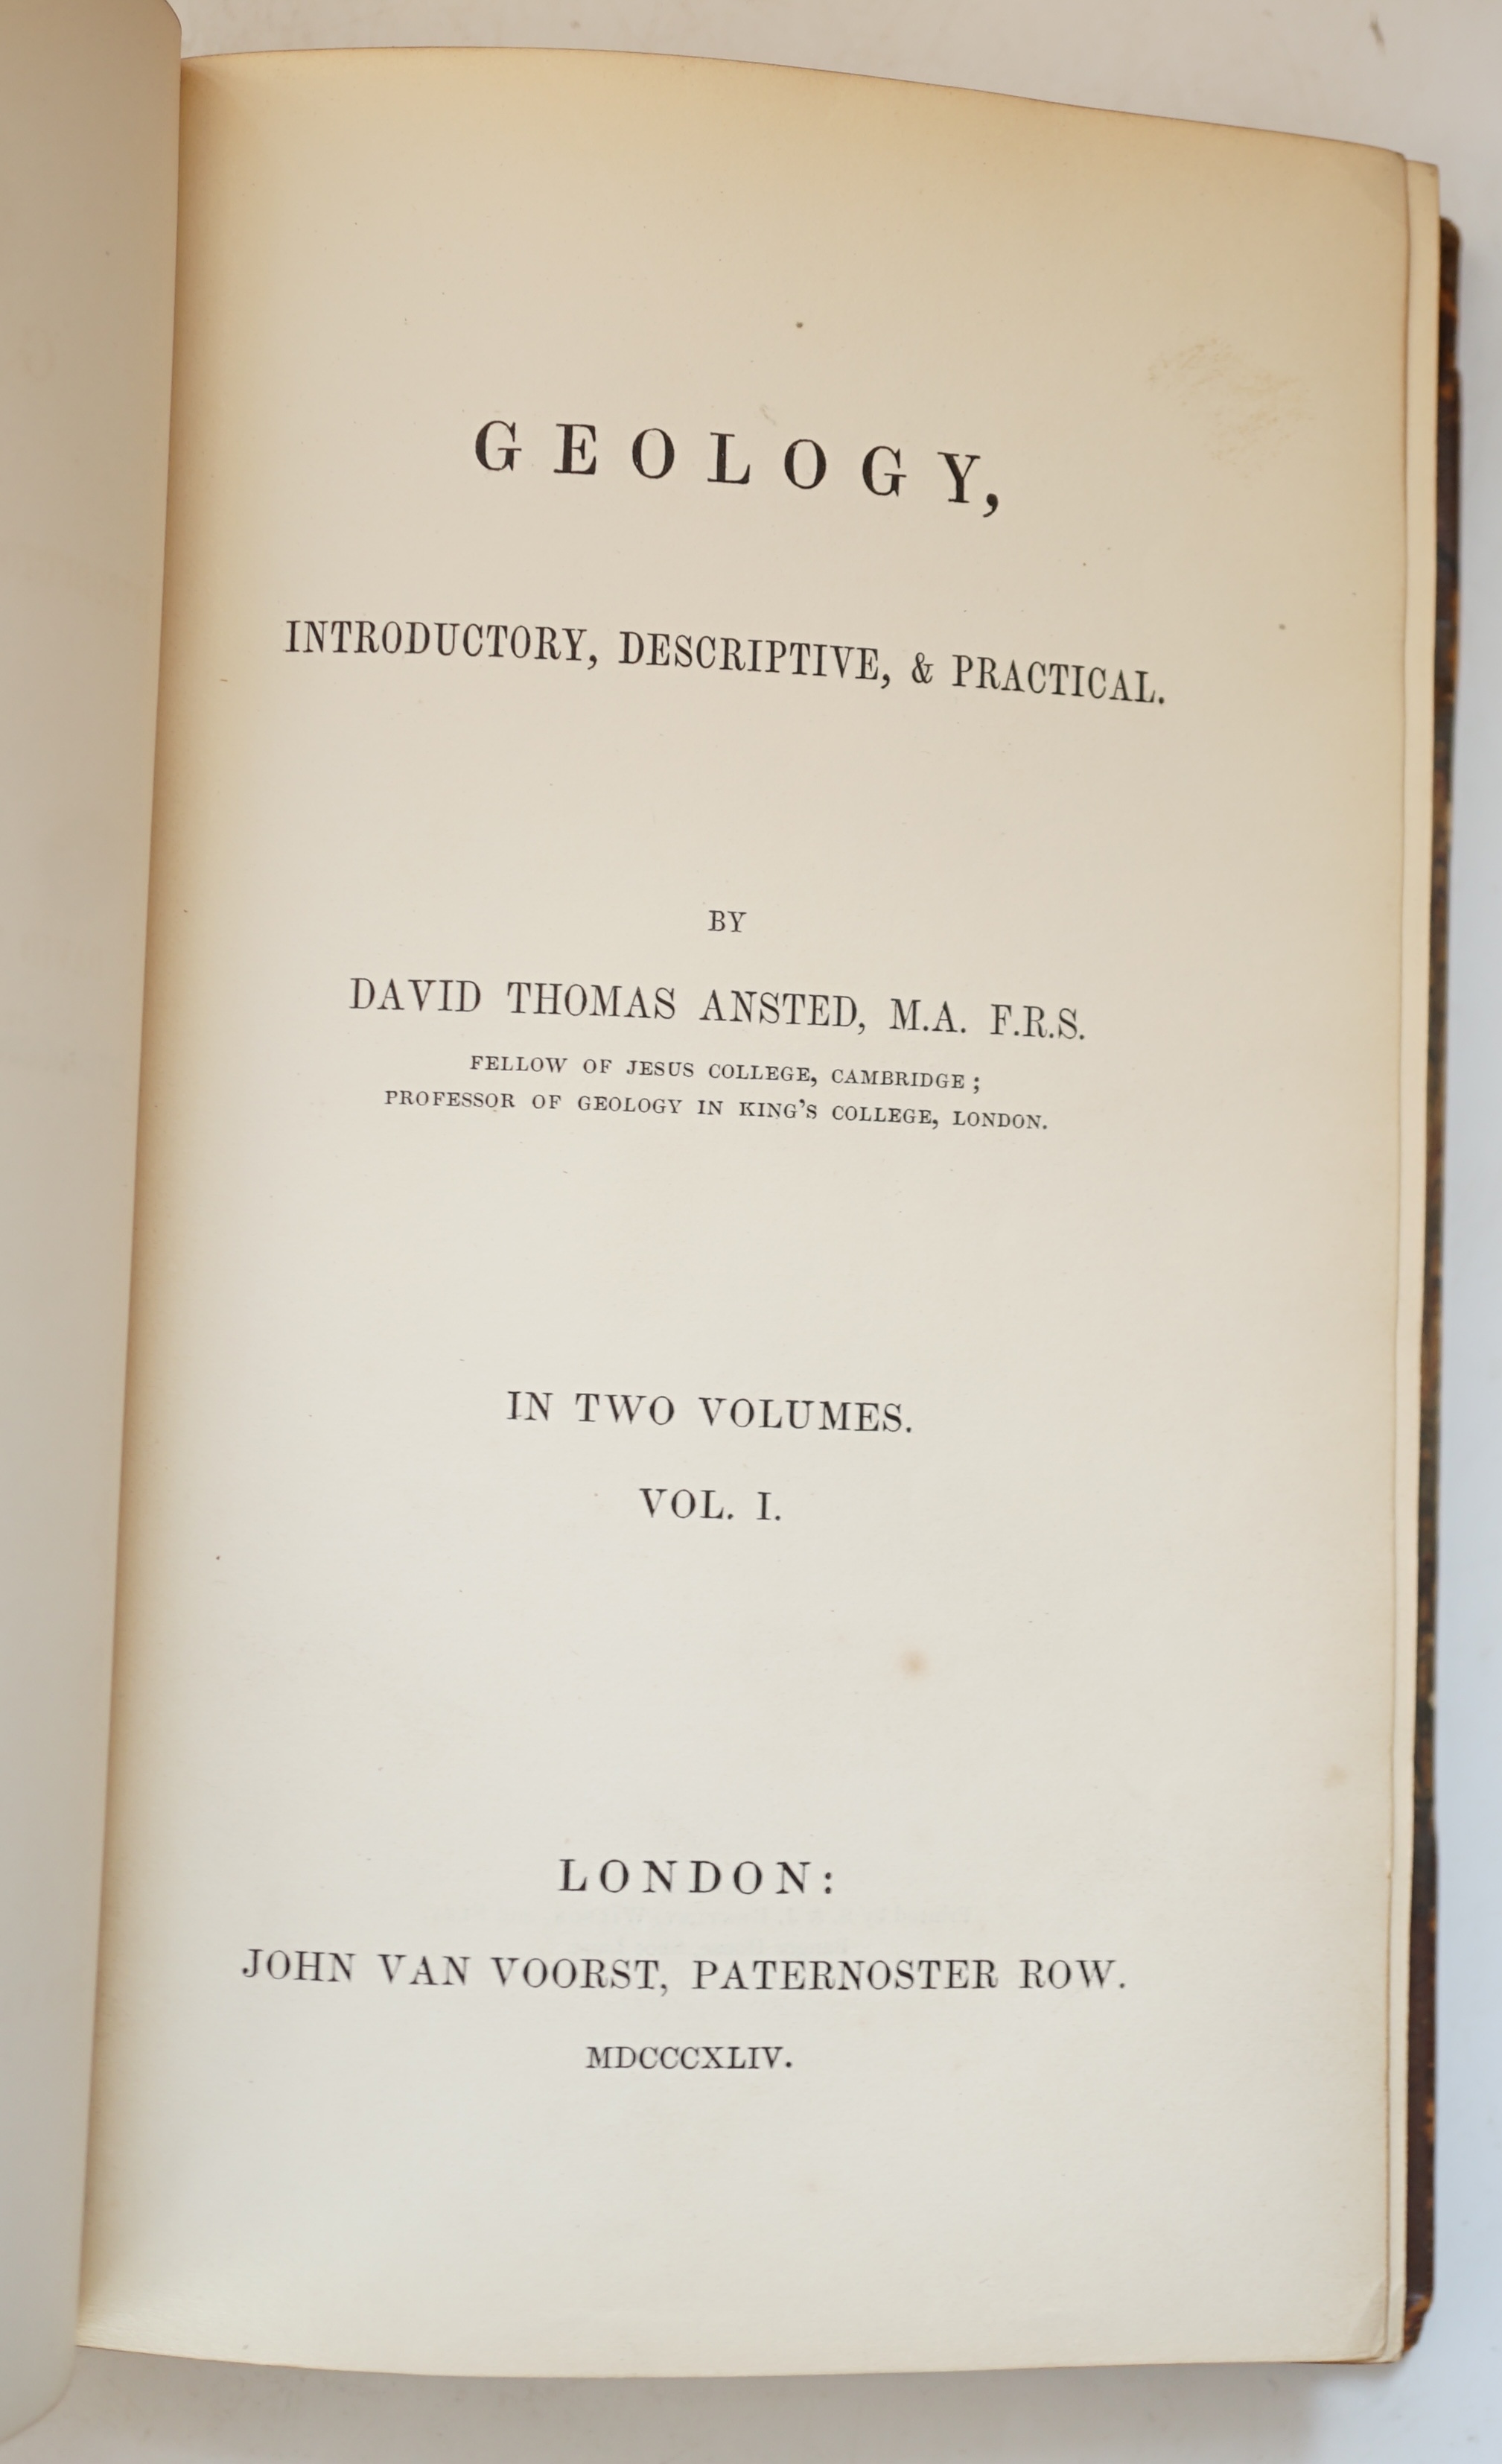 Ansted, David Thomas - Geology, Introductory, Descriptive, & Practical, 2 vols. with authors bookplate, 8vo, half calf rebacked, with numerous engravings, John Van Voorst, London, 1844